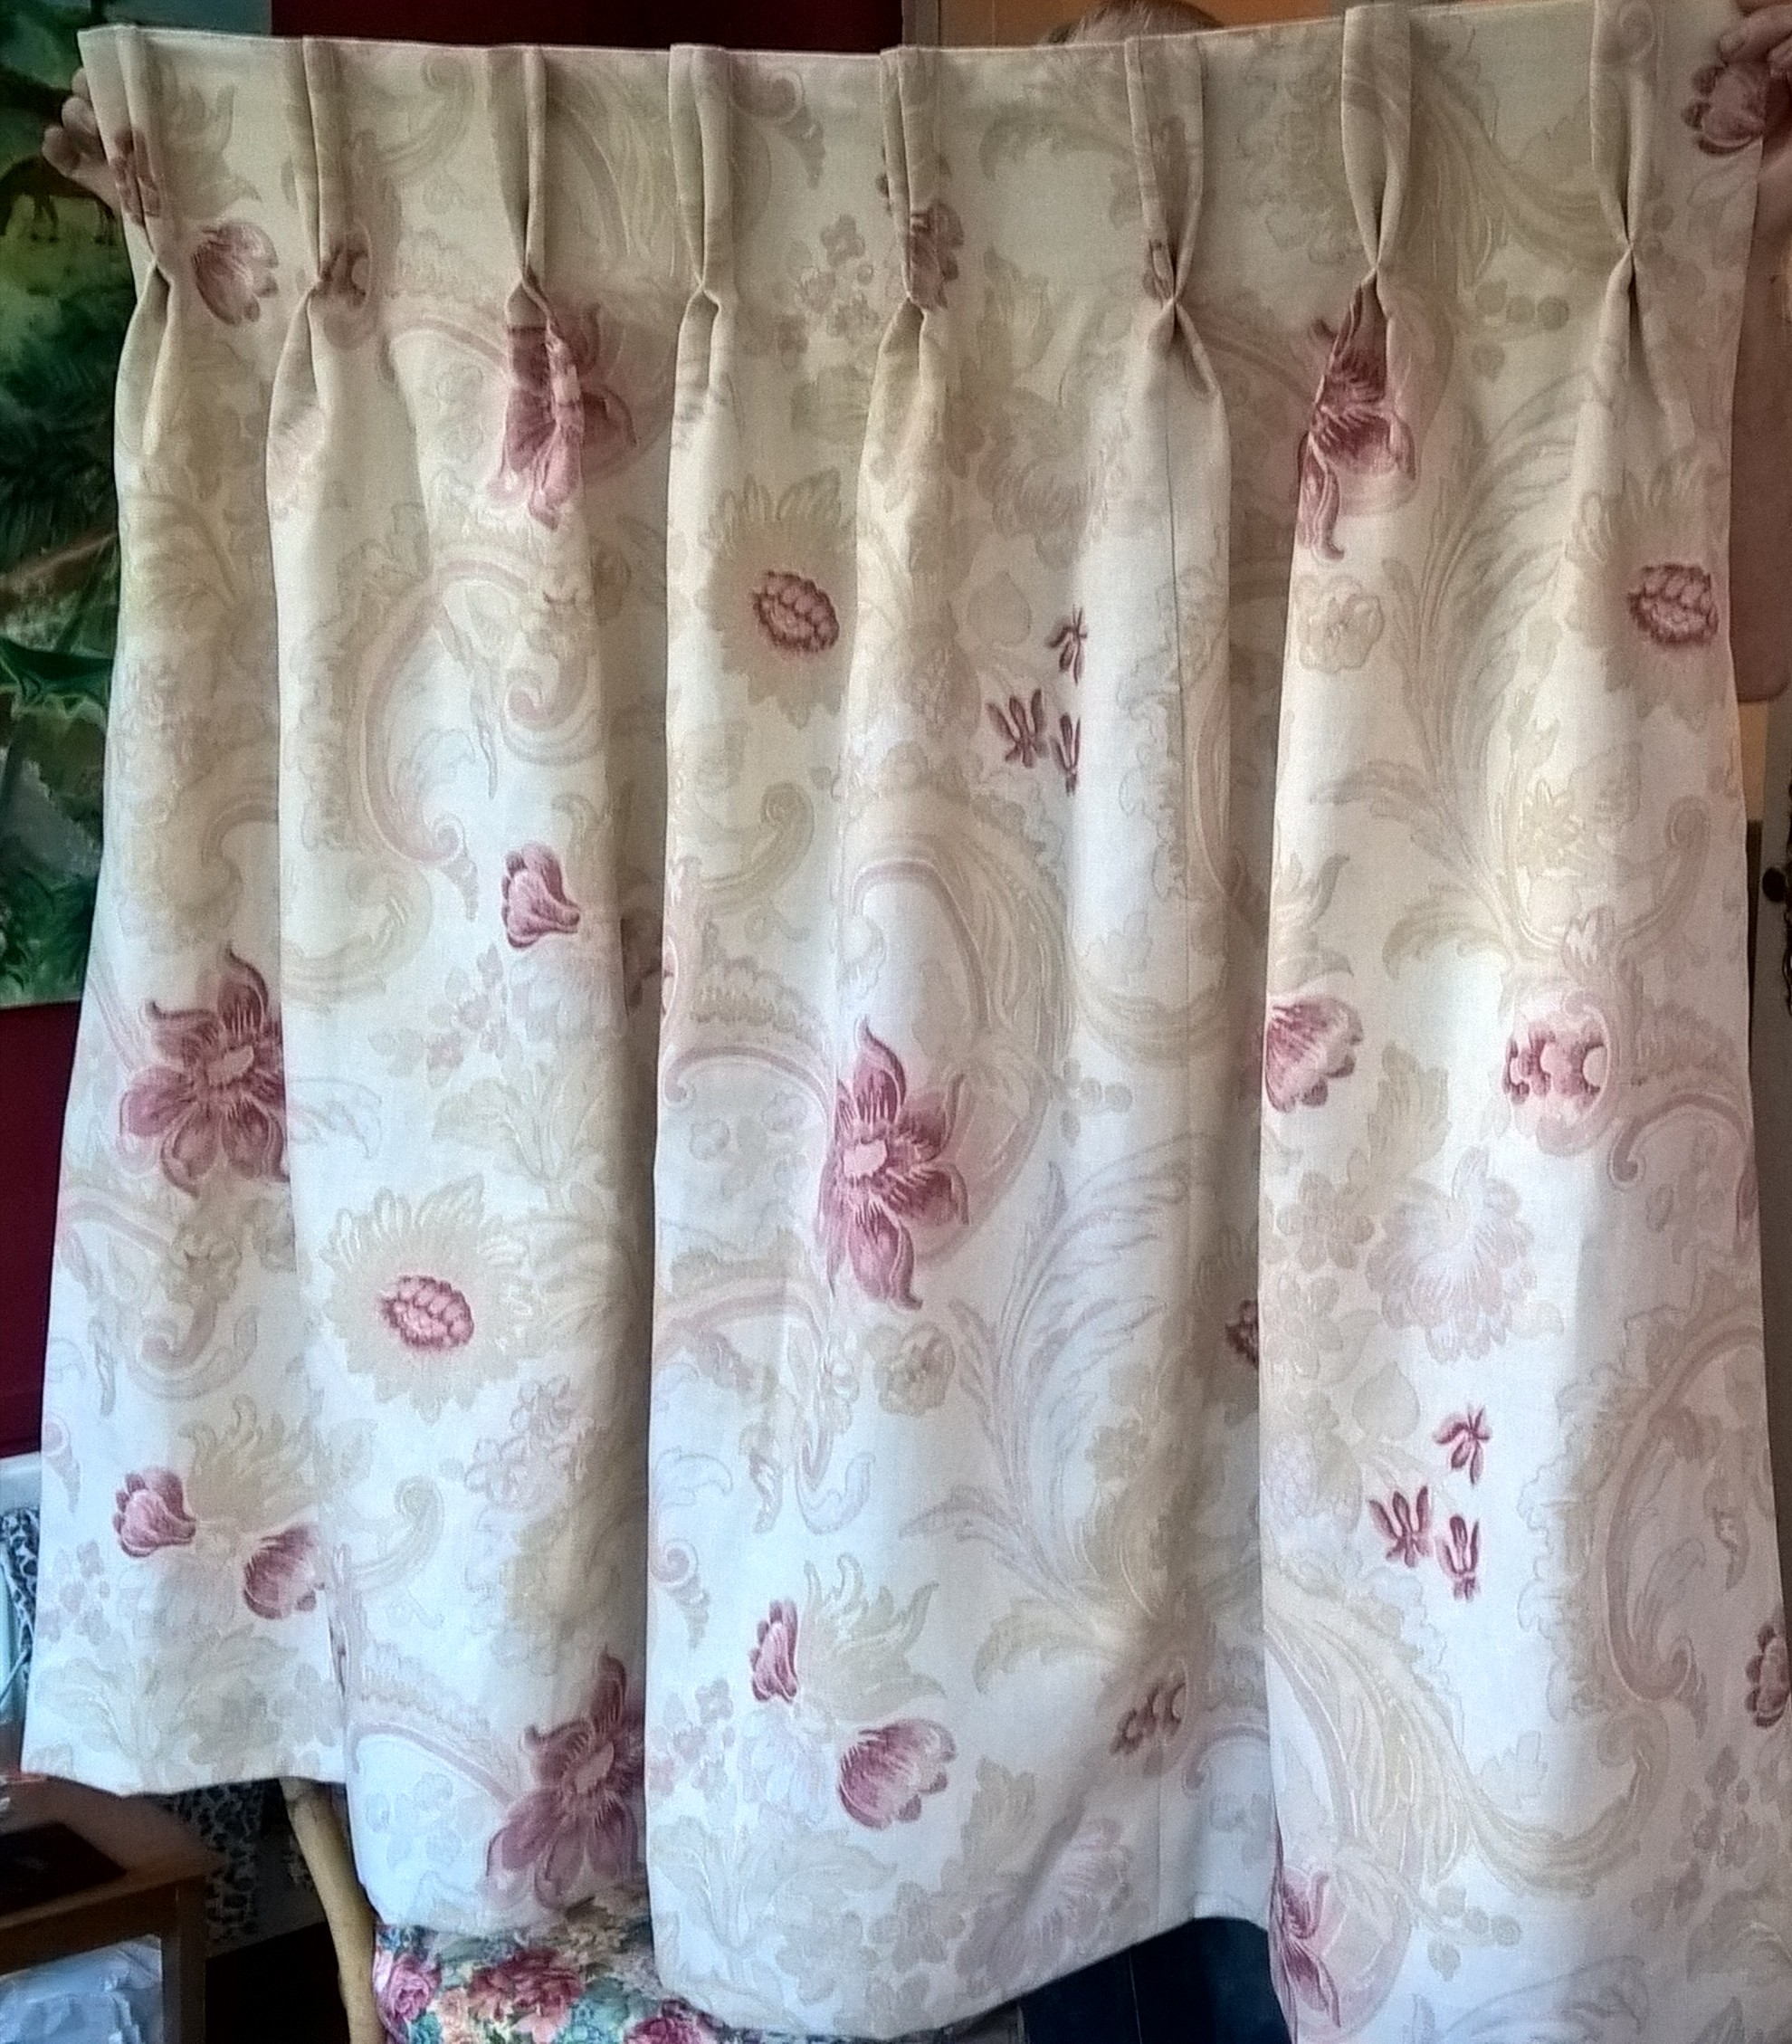 Made-to-measure pleated curtains